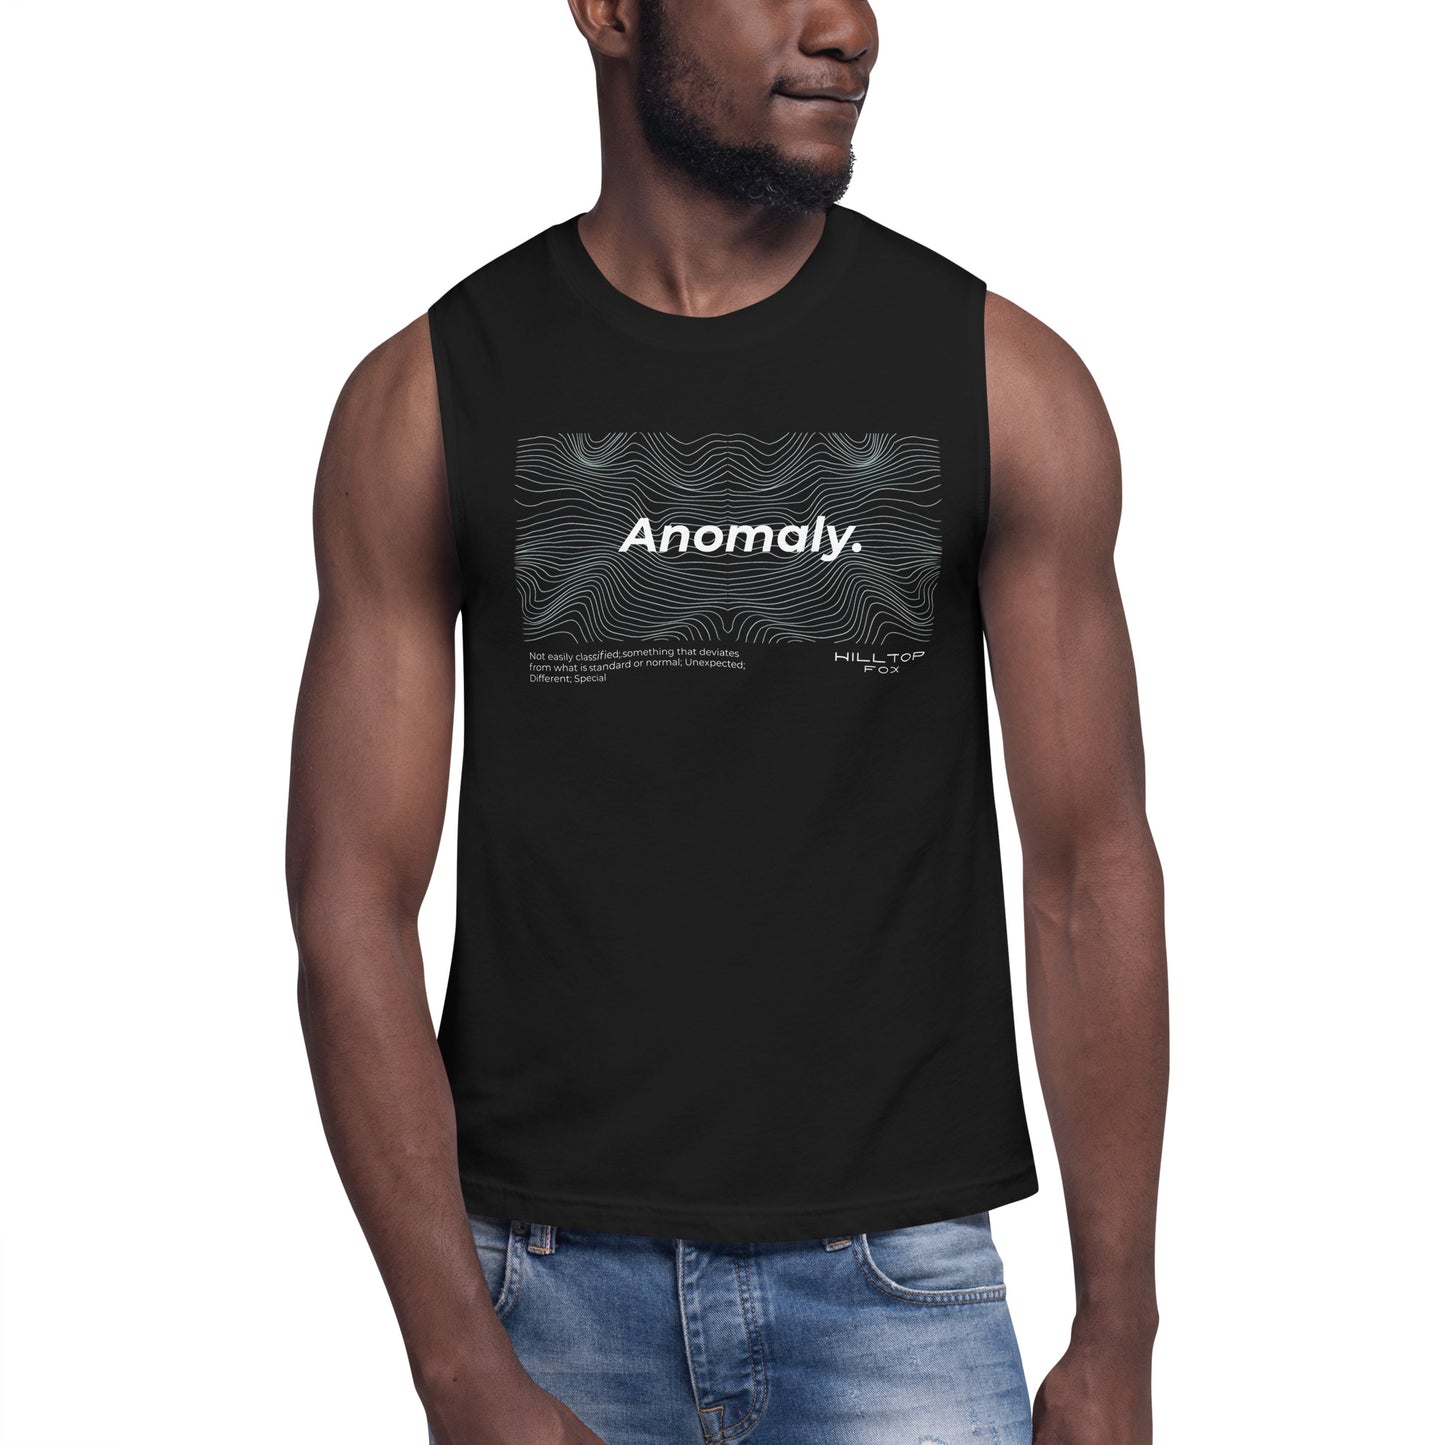 Chemise musculaire d’anomalie